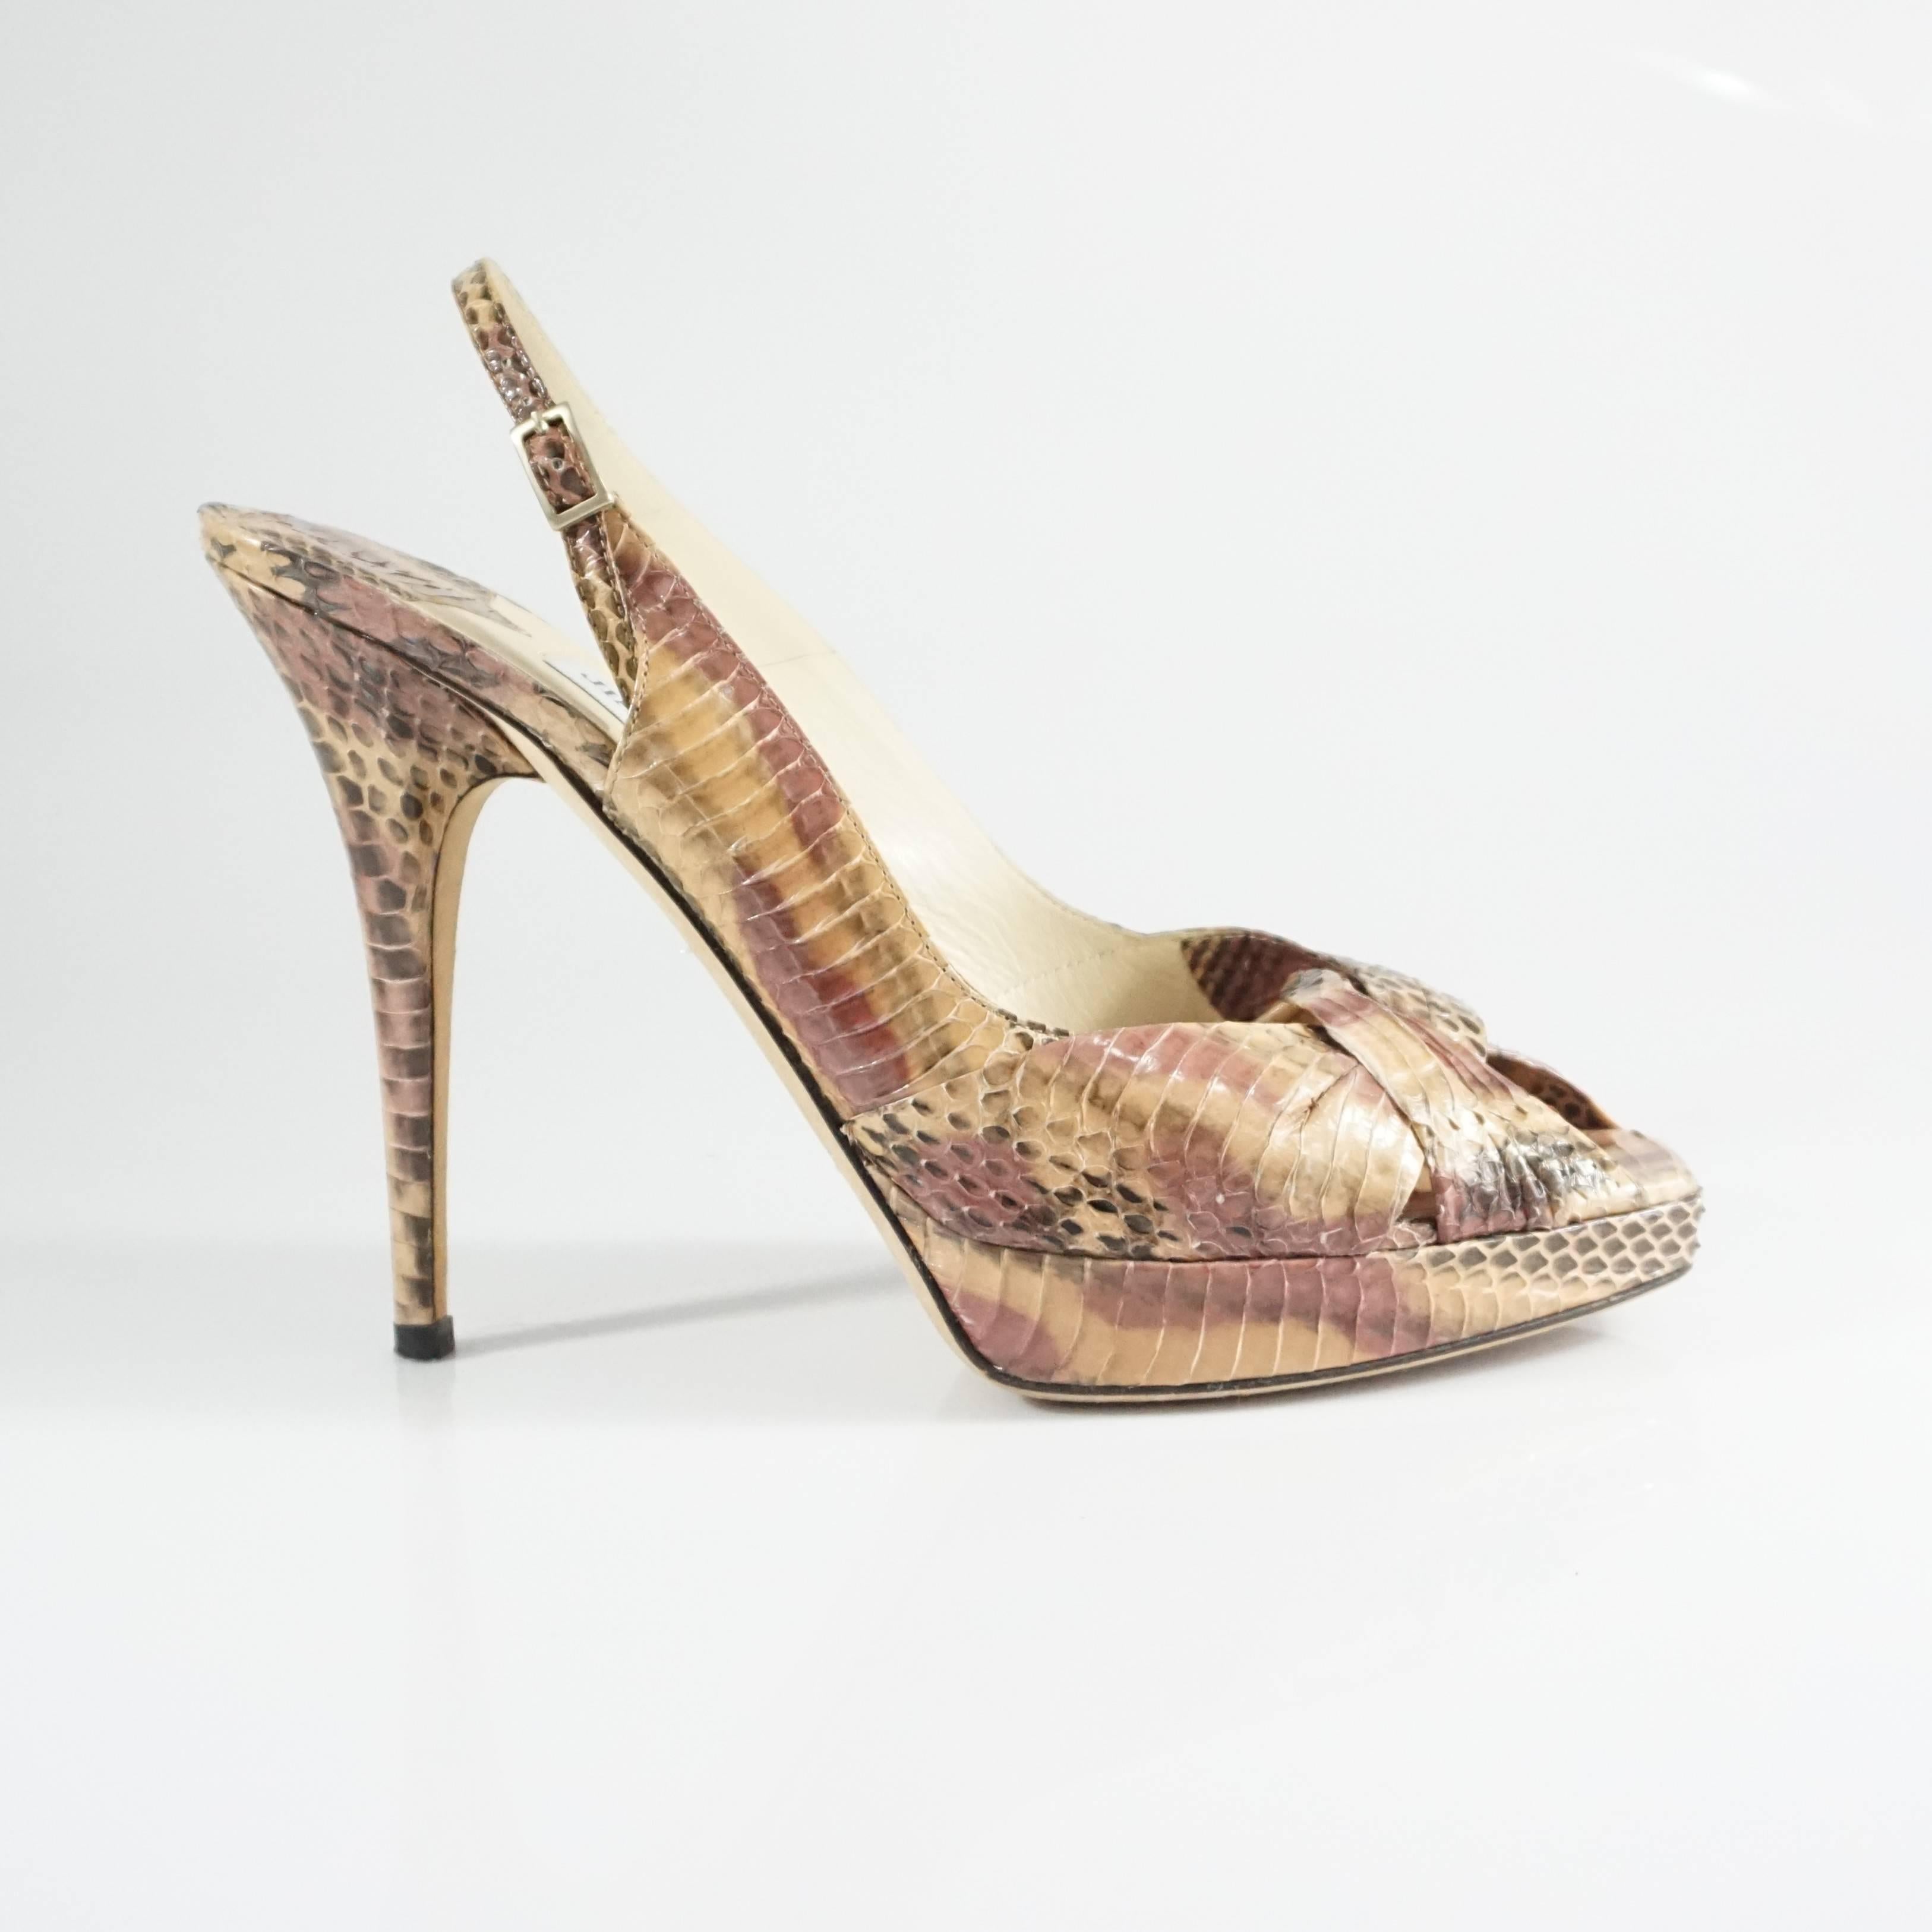 These Jimmy Choo heels have a unique look. They feature a crossing toe bed, platform, and slingback. The shoes are in very good condition with minimal bottom wear and some pulling of the snake scales as seen in the last images. 

Platform:
Heel: